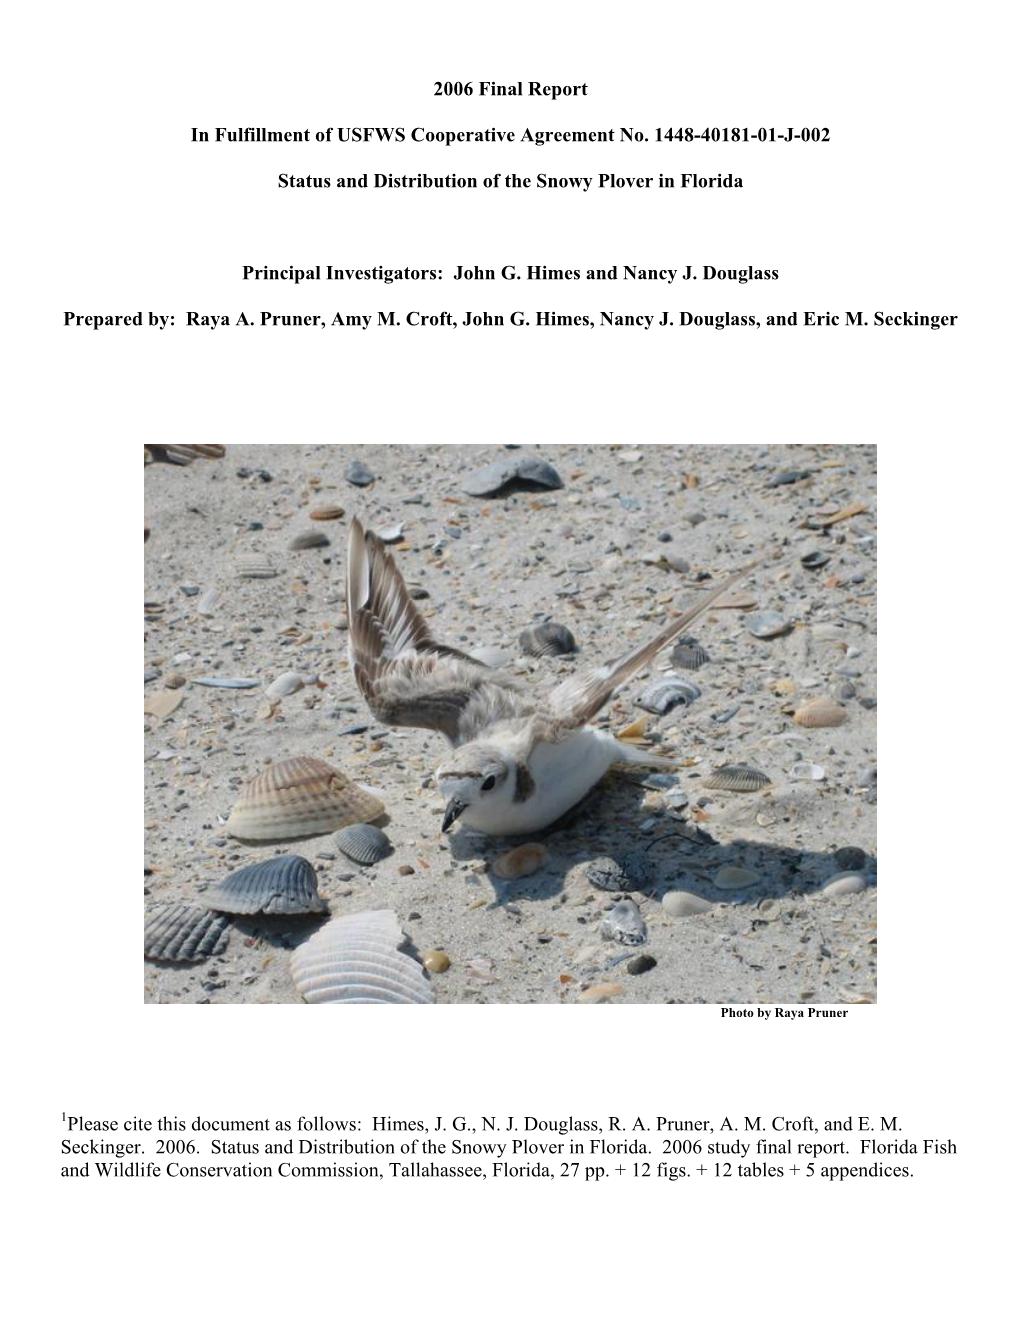 Status and Distribution of Snowy Plover